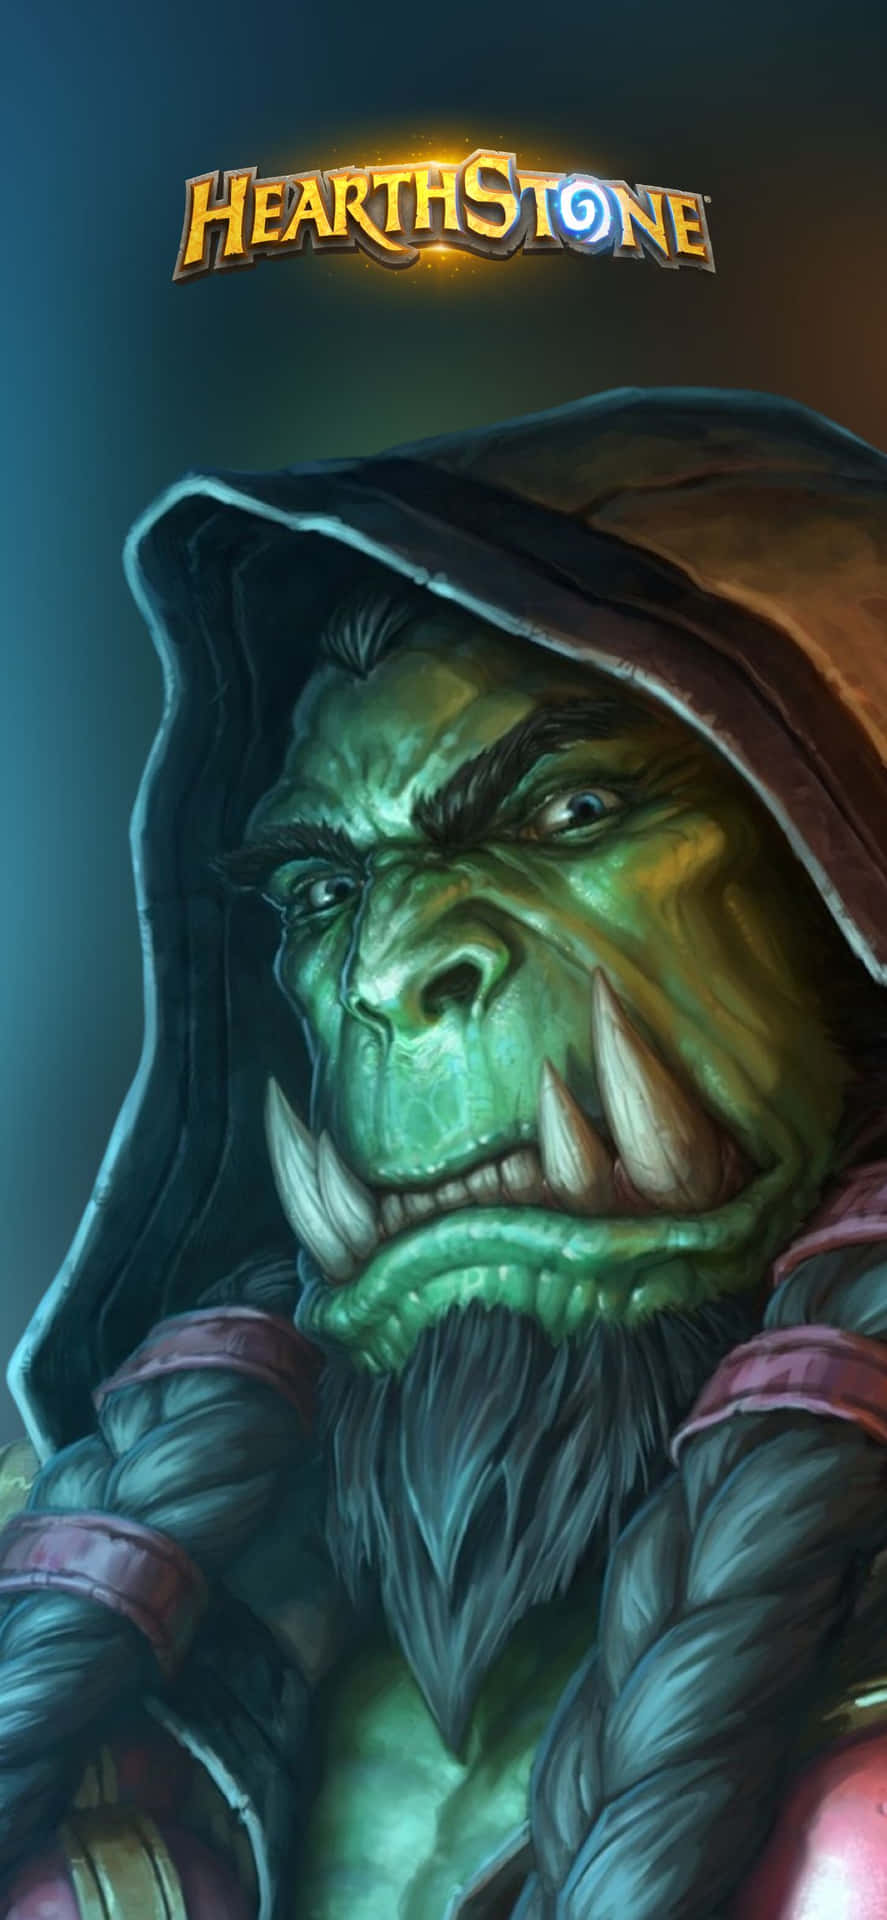 "Battle it Out in Hearthstone on your iPhone Xs"